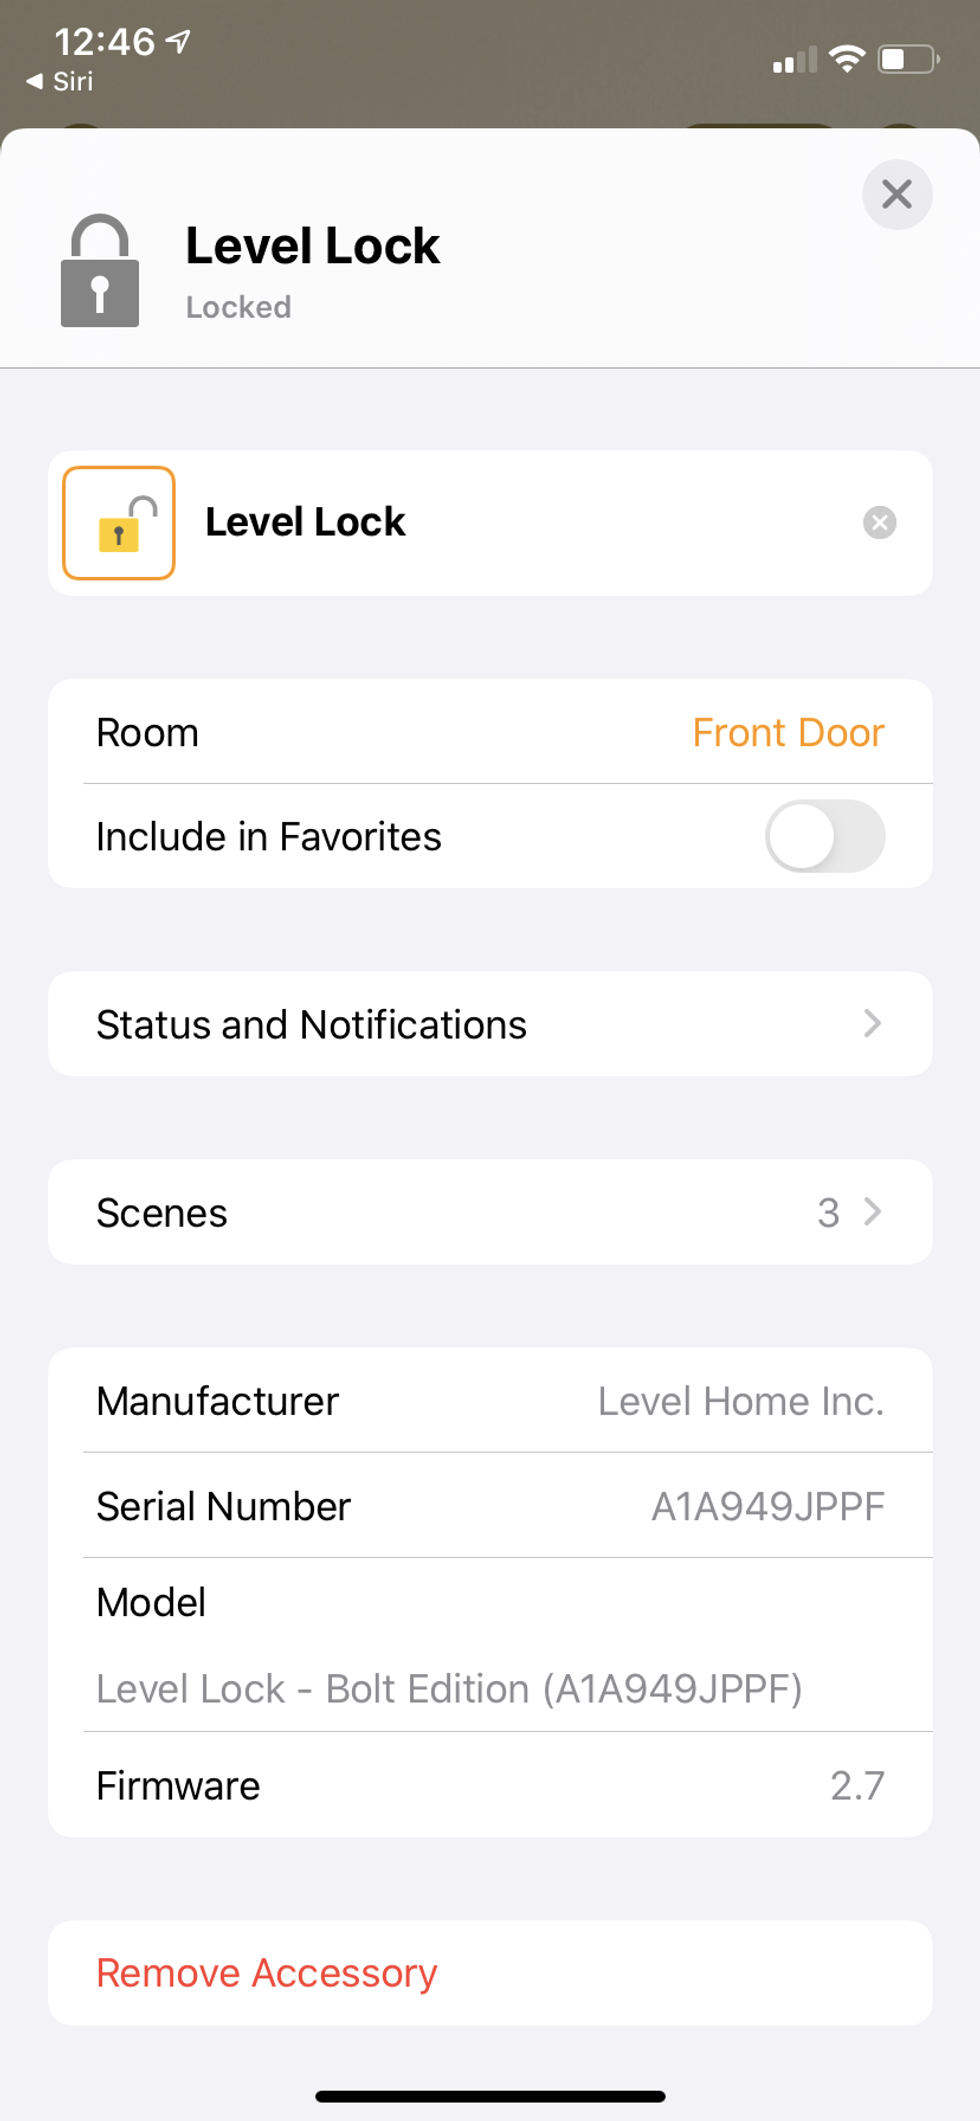 Level Lock connects with Apple HomeKit app